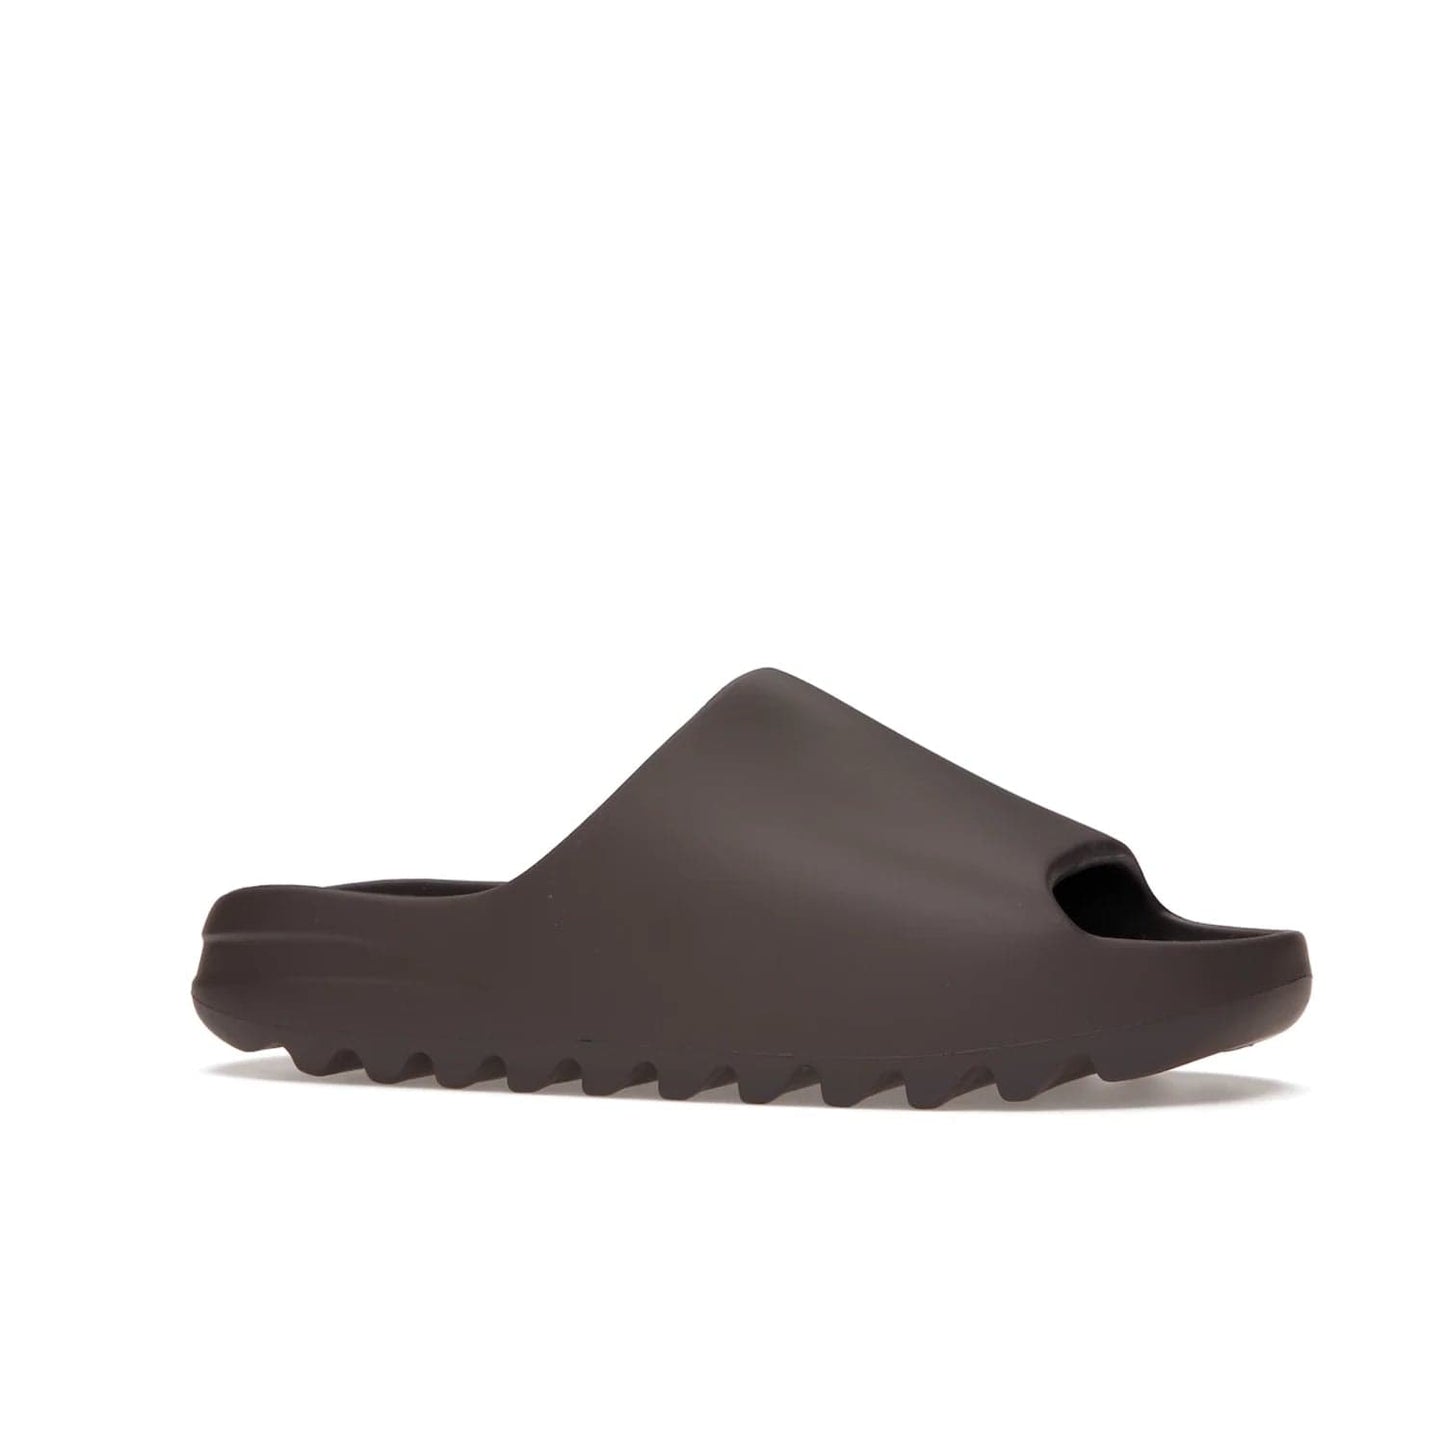 adidas Yeezy Slide Soot - Image 3 - Only at www.BallersClubKickz.com - Shop the Yeezy Slide Soot sneaker by Adidas, a sleek blend of form and function. Monochrome silhouette in Soot/Soot/Soot. Lightweight EVA foam offers comfort and durability. Get the must-have style today.